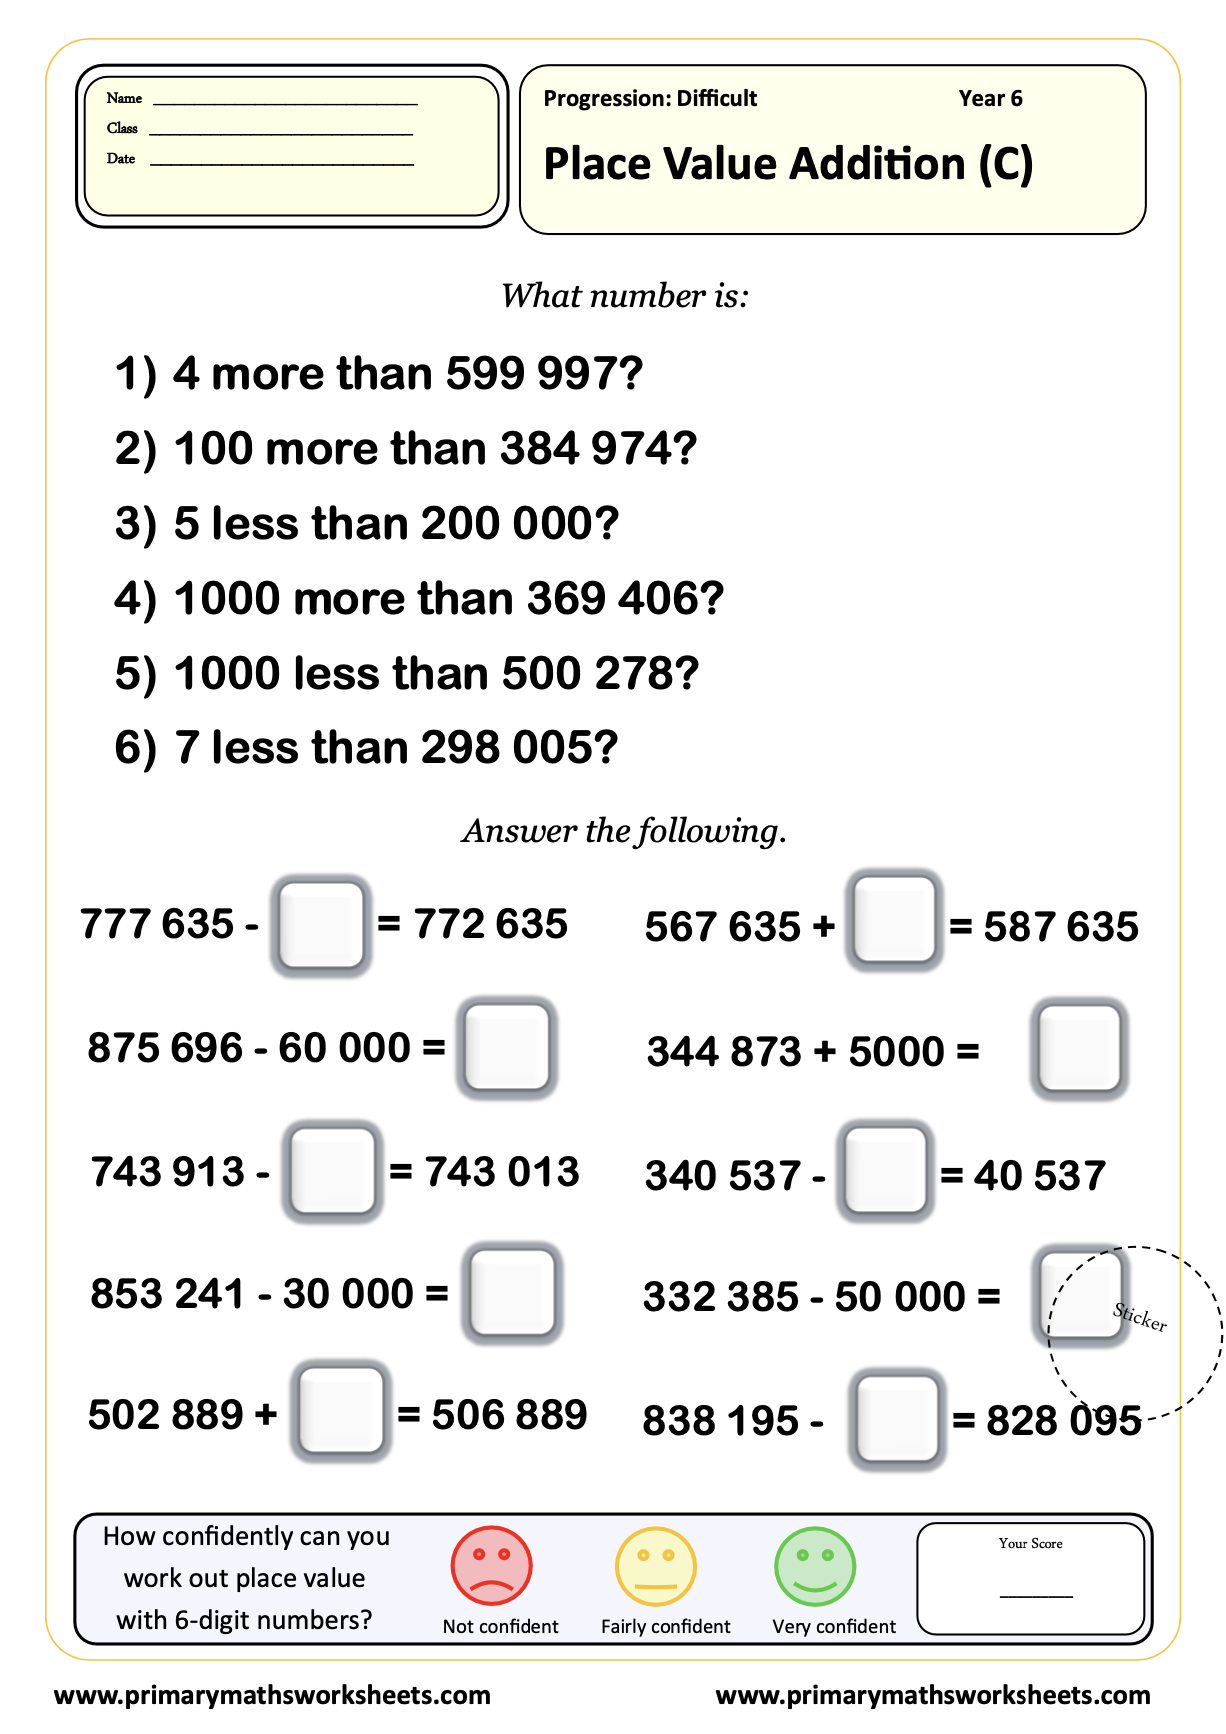 Place Value Worksheet for year 6